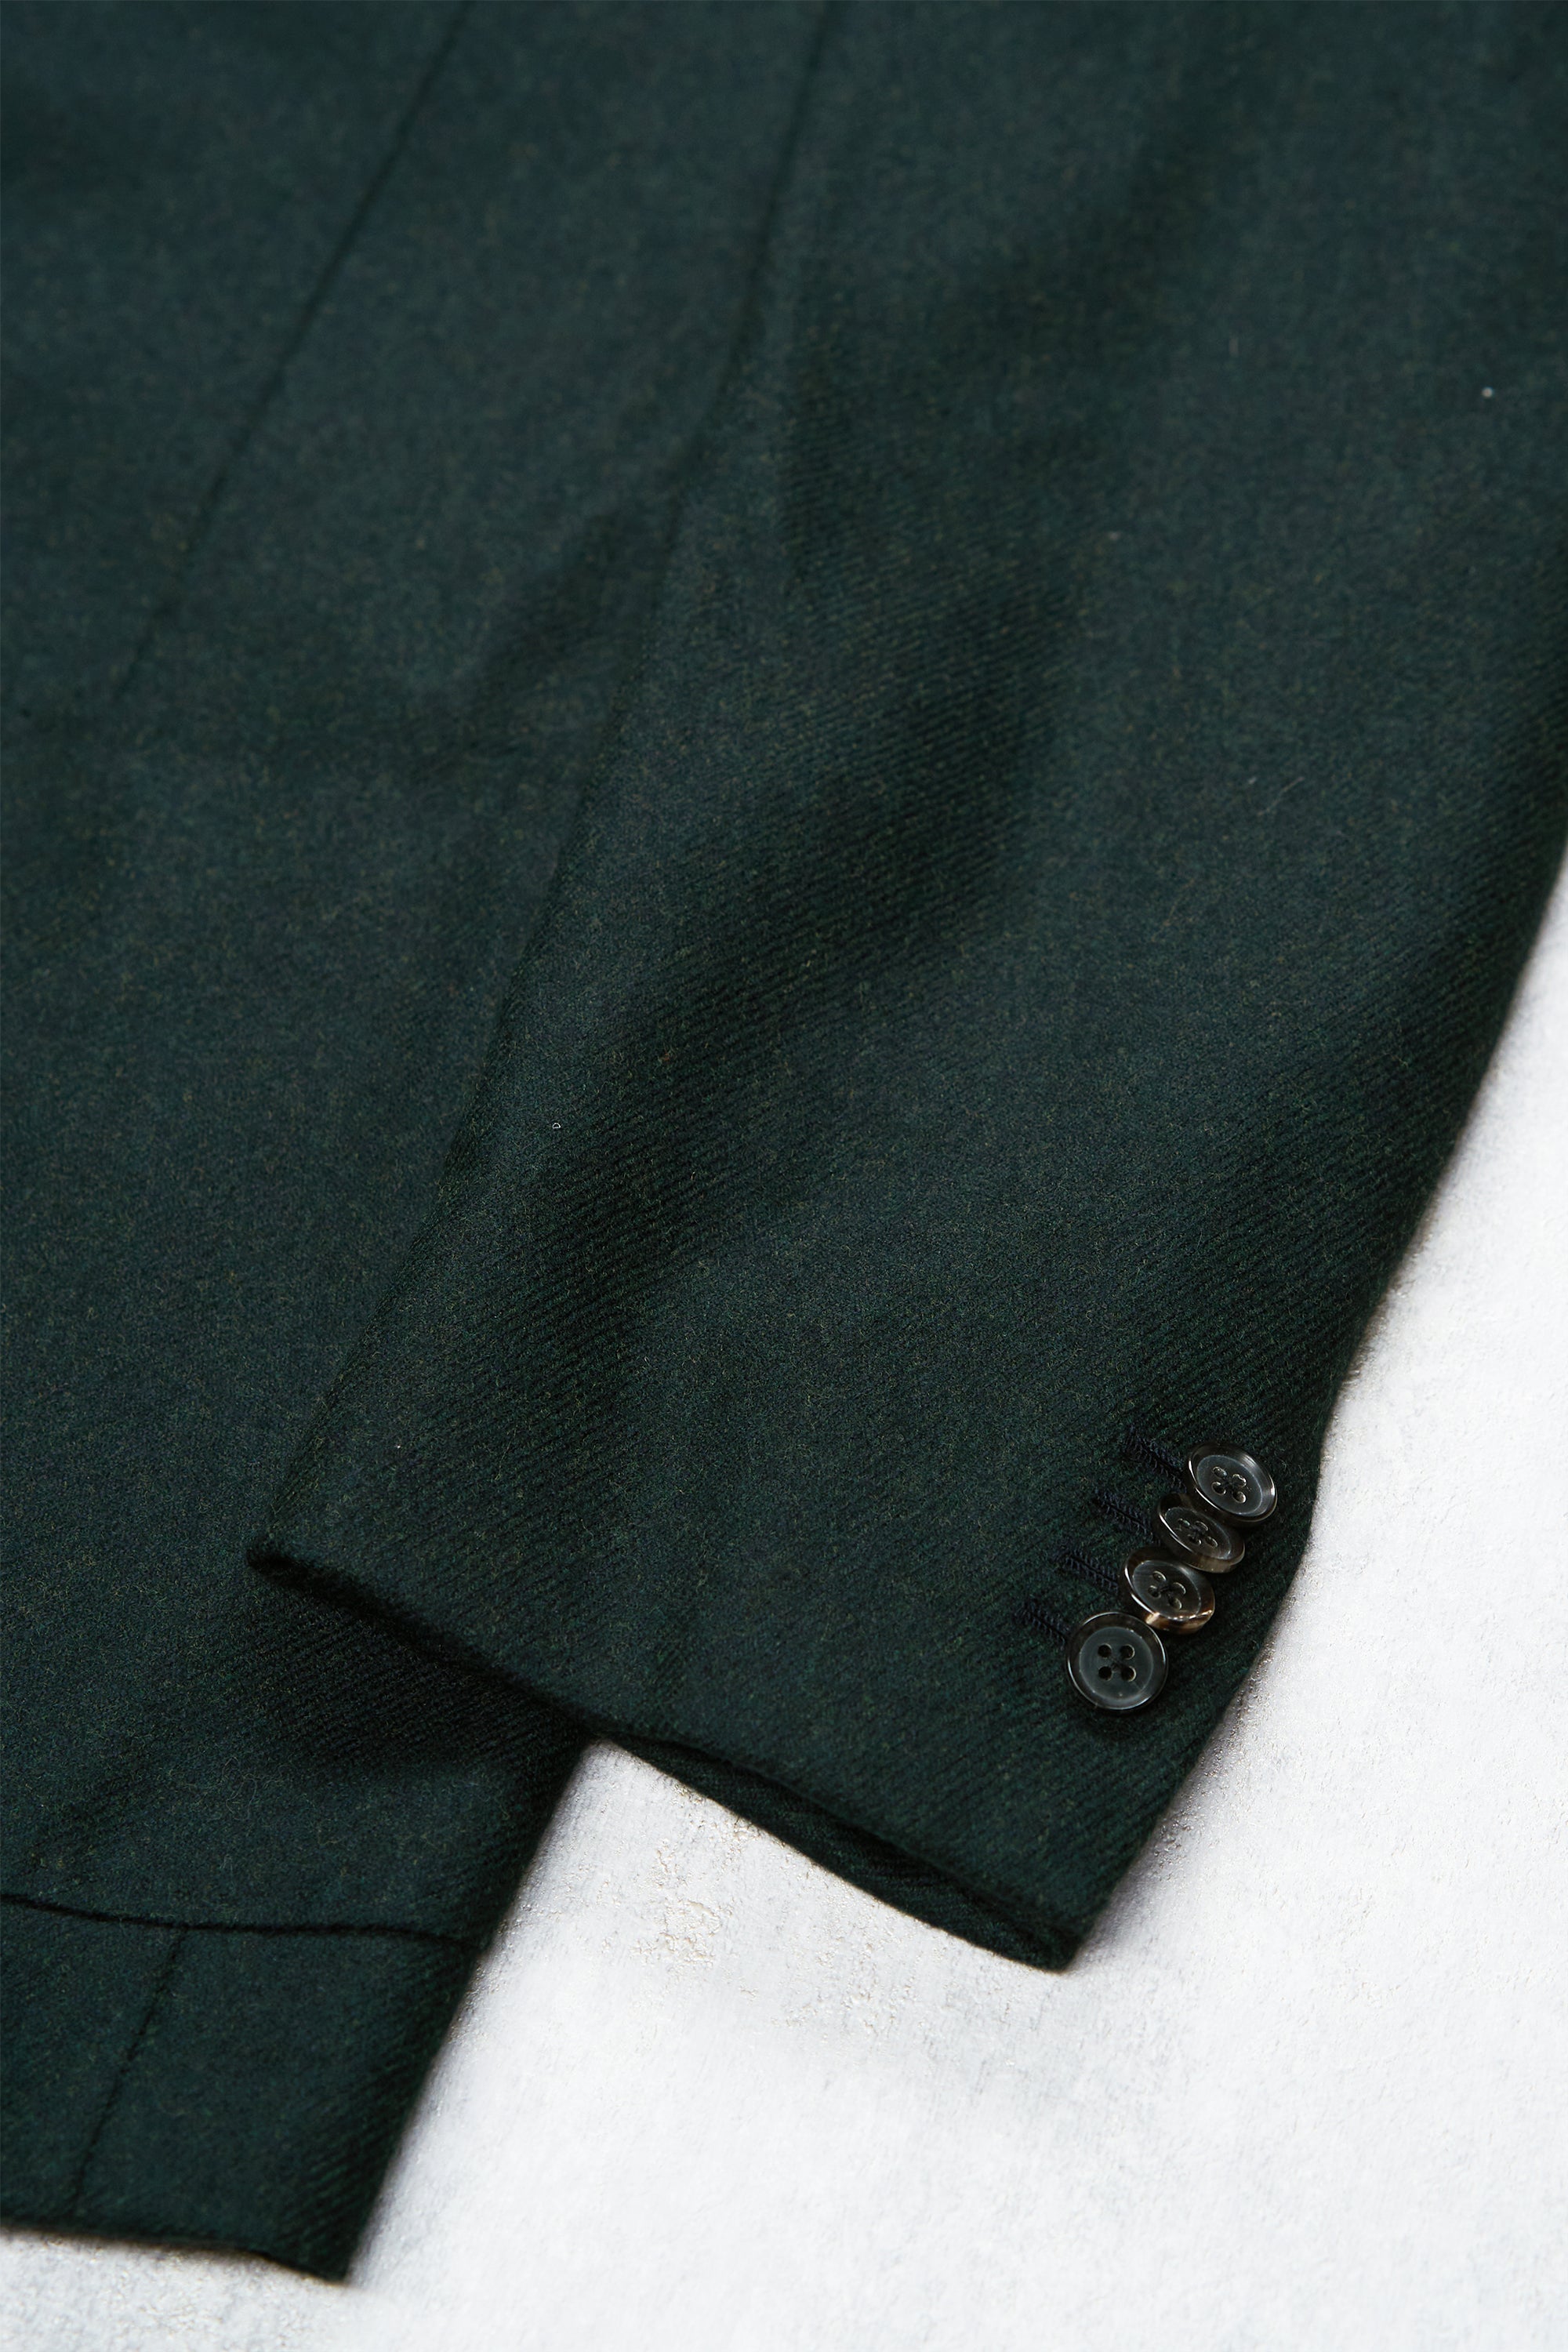 The Armoury by Ring Jacket Model 3 Dark Green Wool/Cashmere Twill Sport Coat